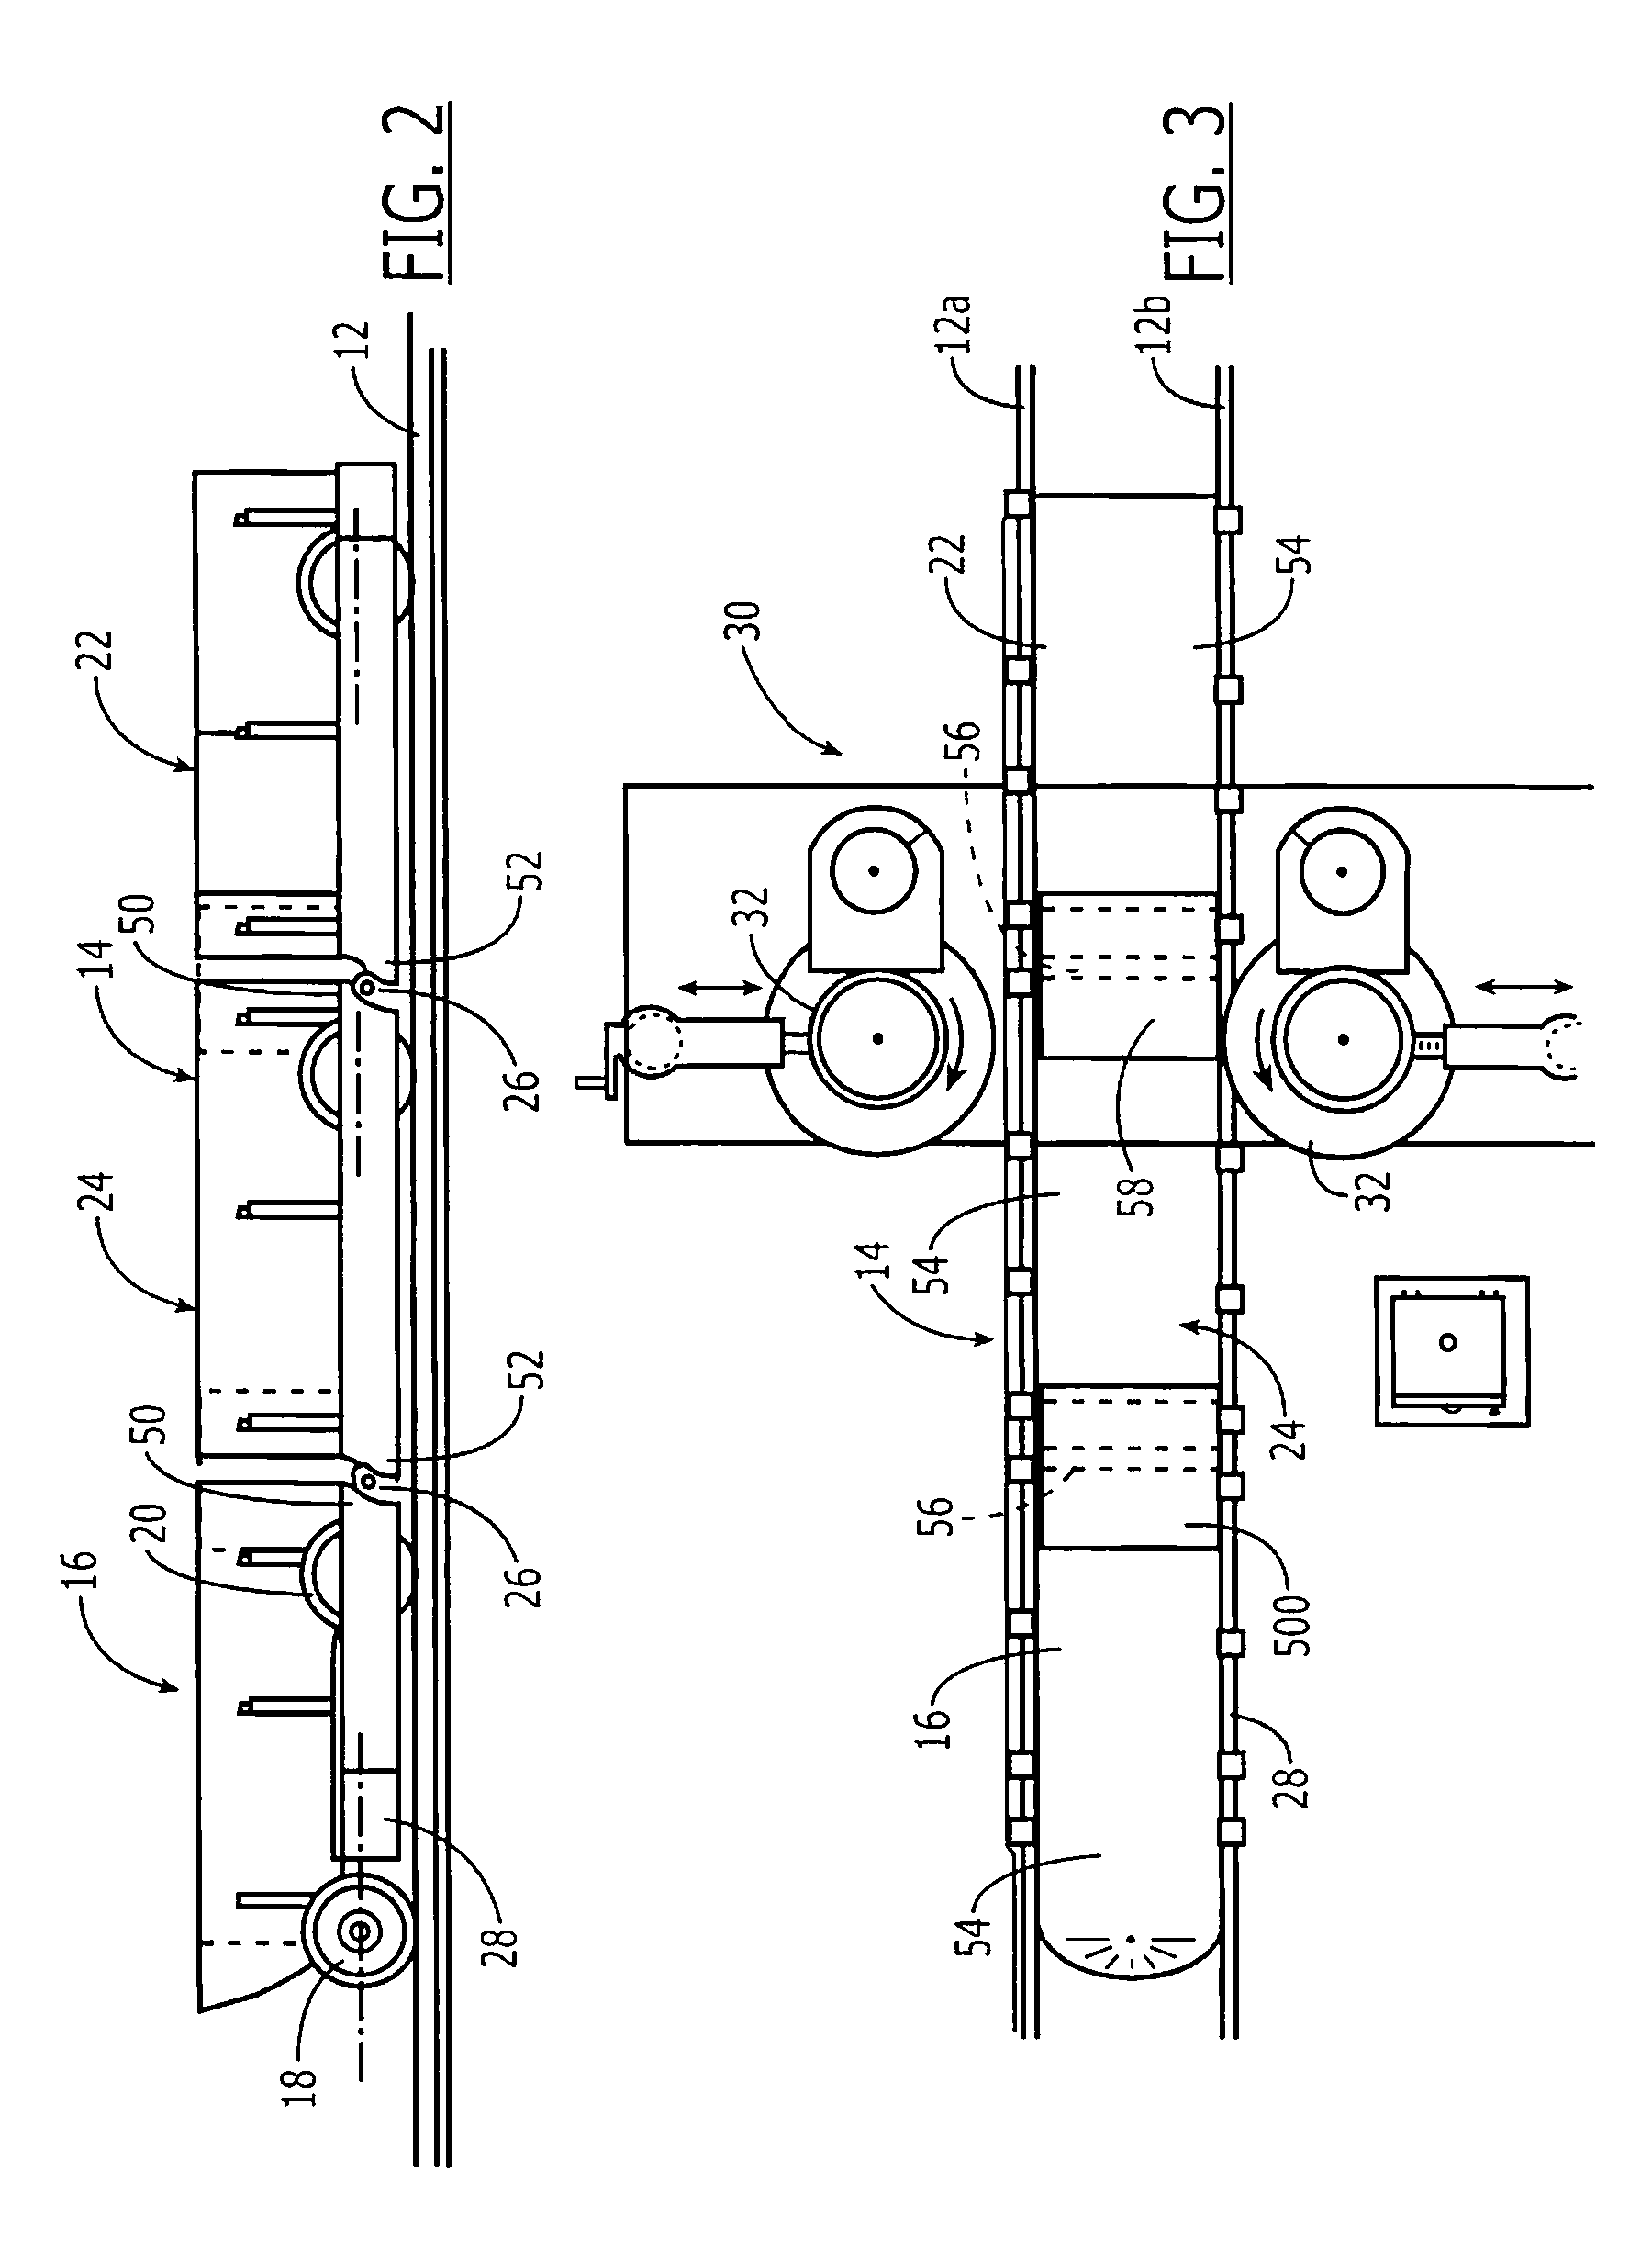 Method of Controlling a Rail Transport System for Conveying Bulk Materials